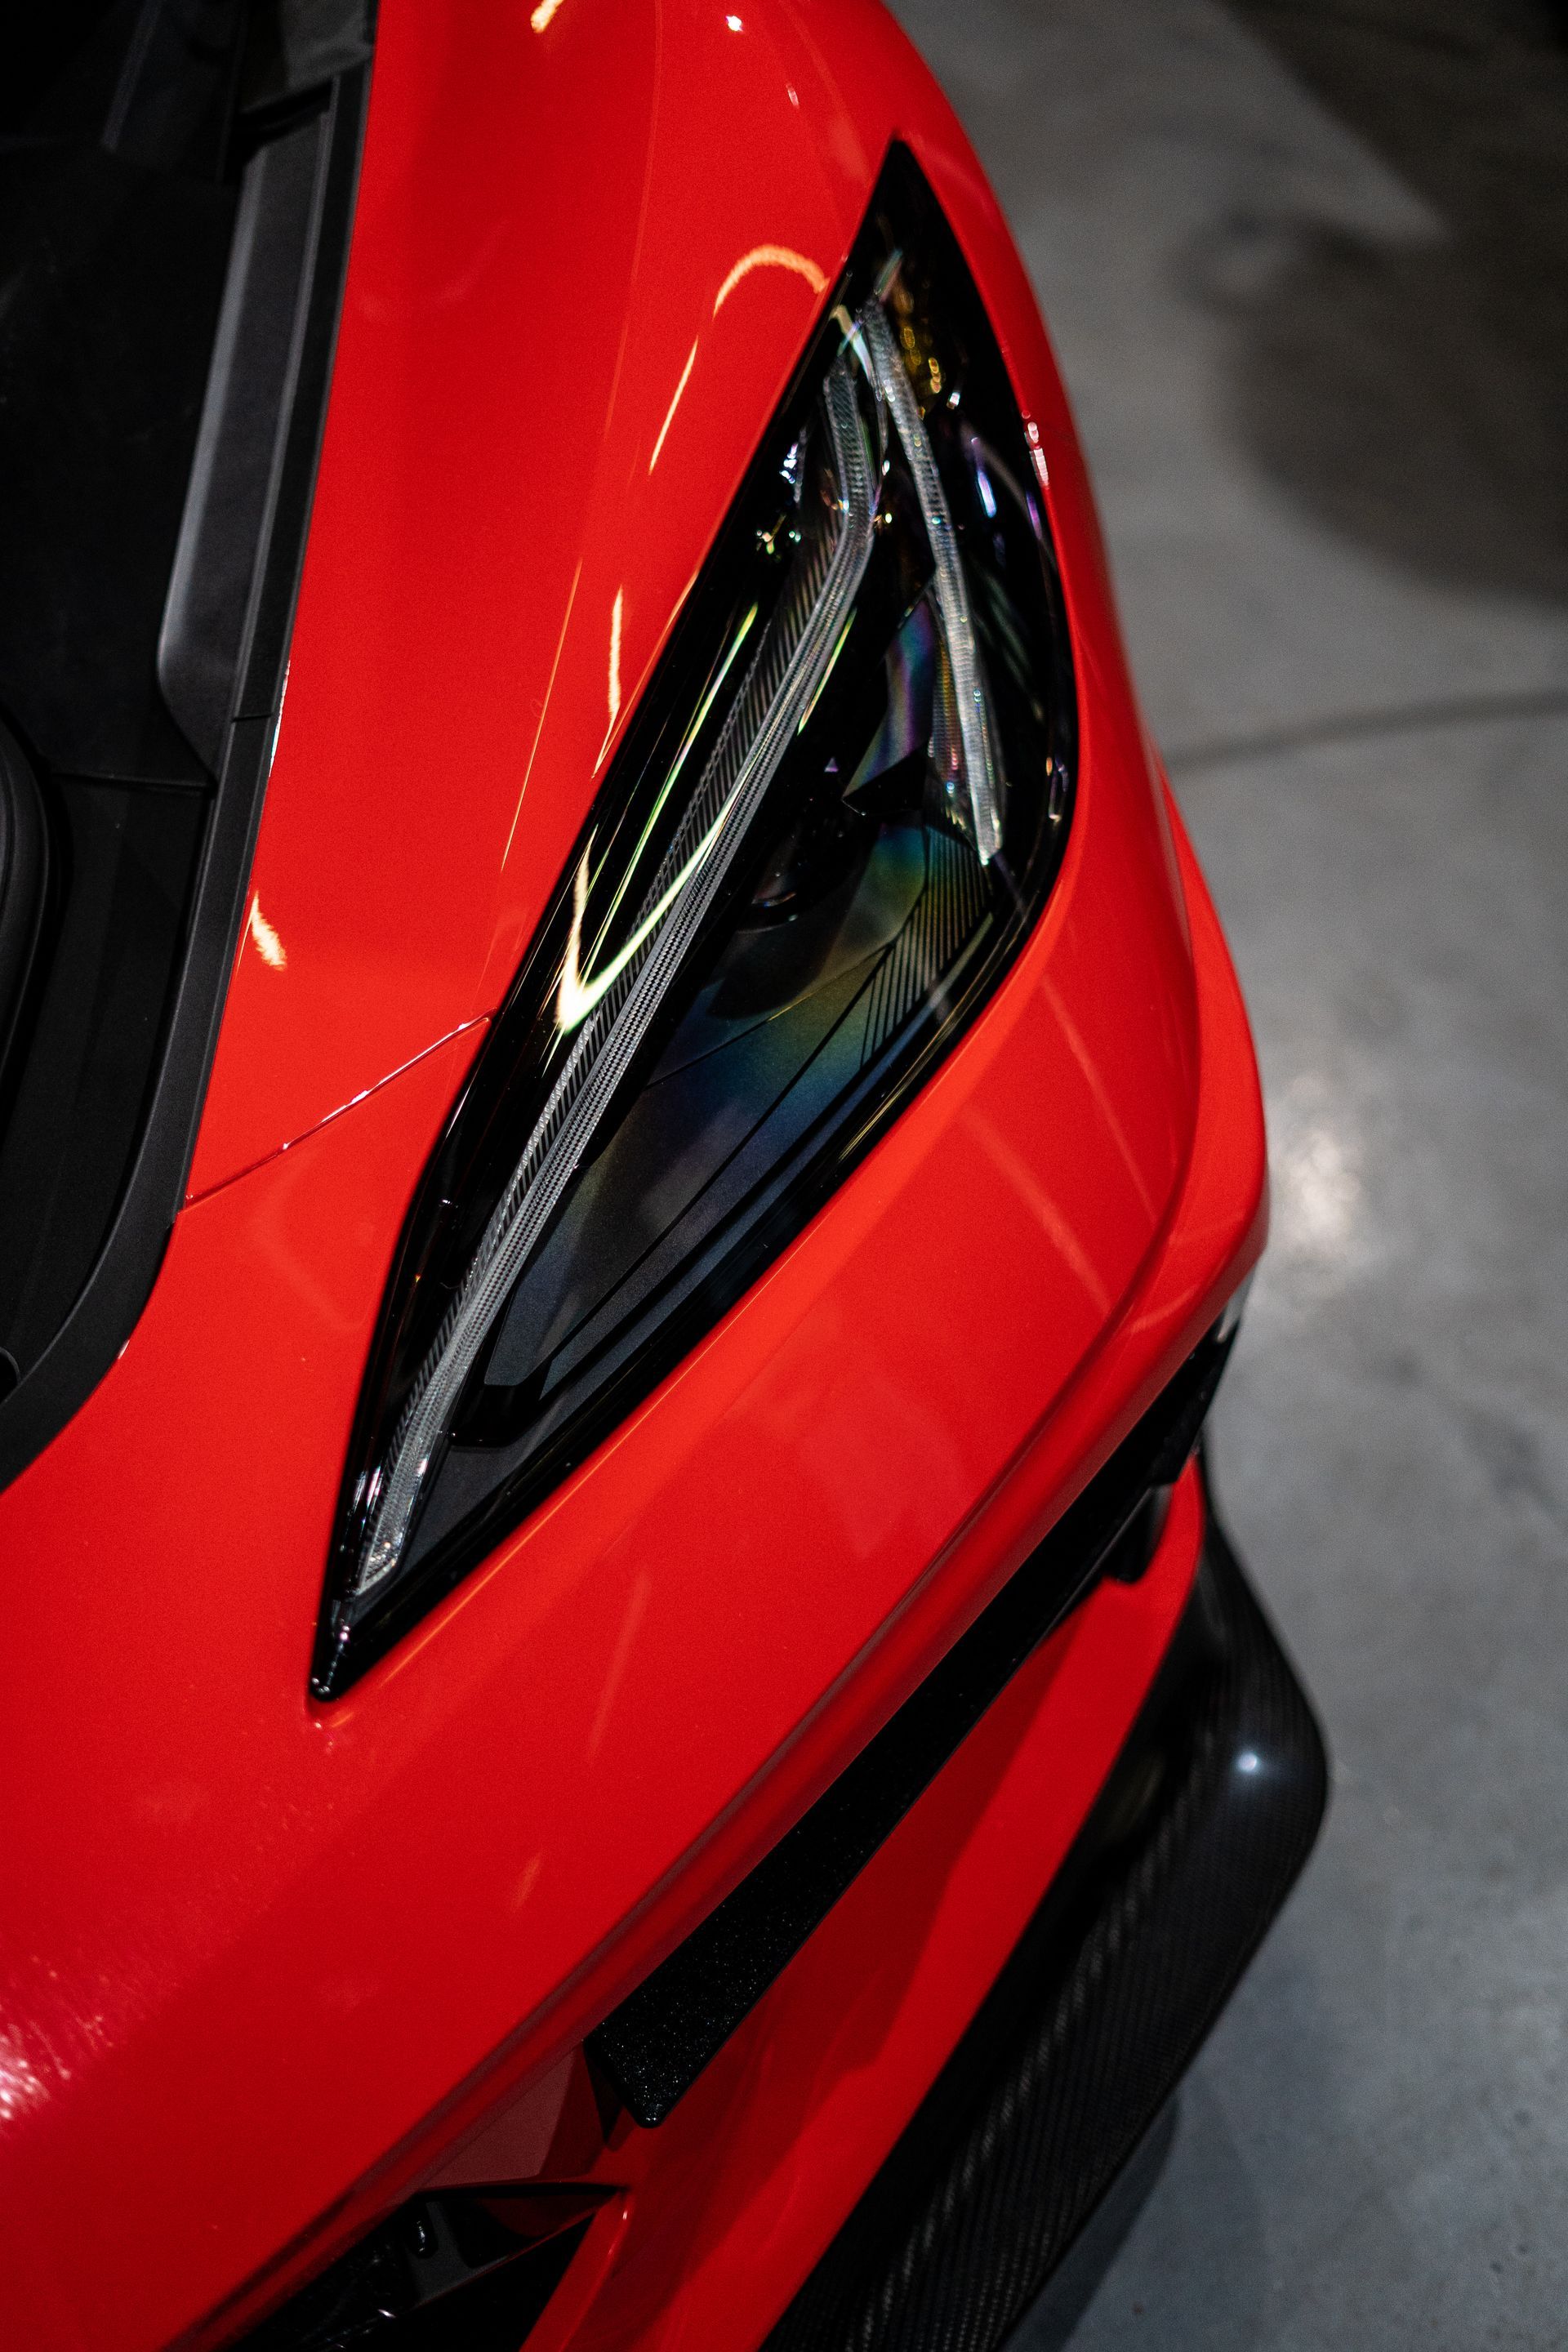 A close up of the headlight of a red sports car.